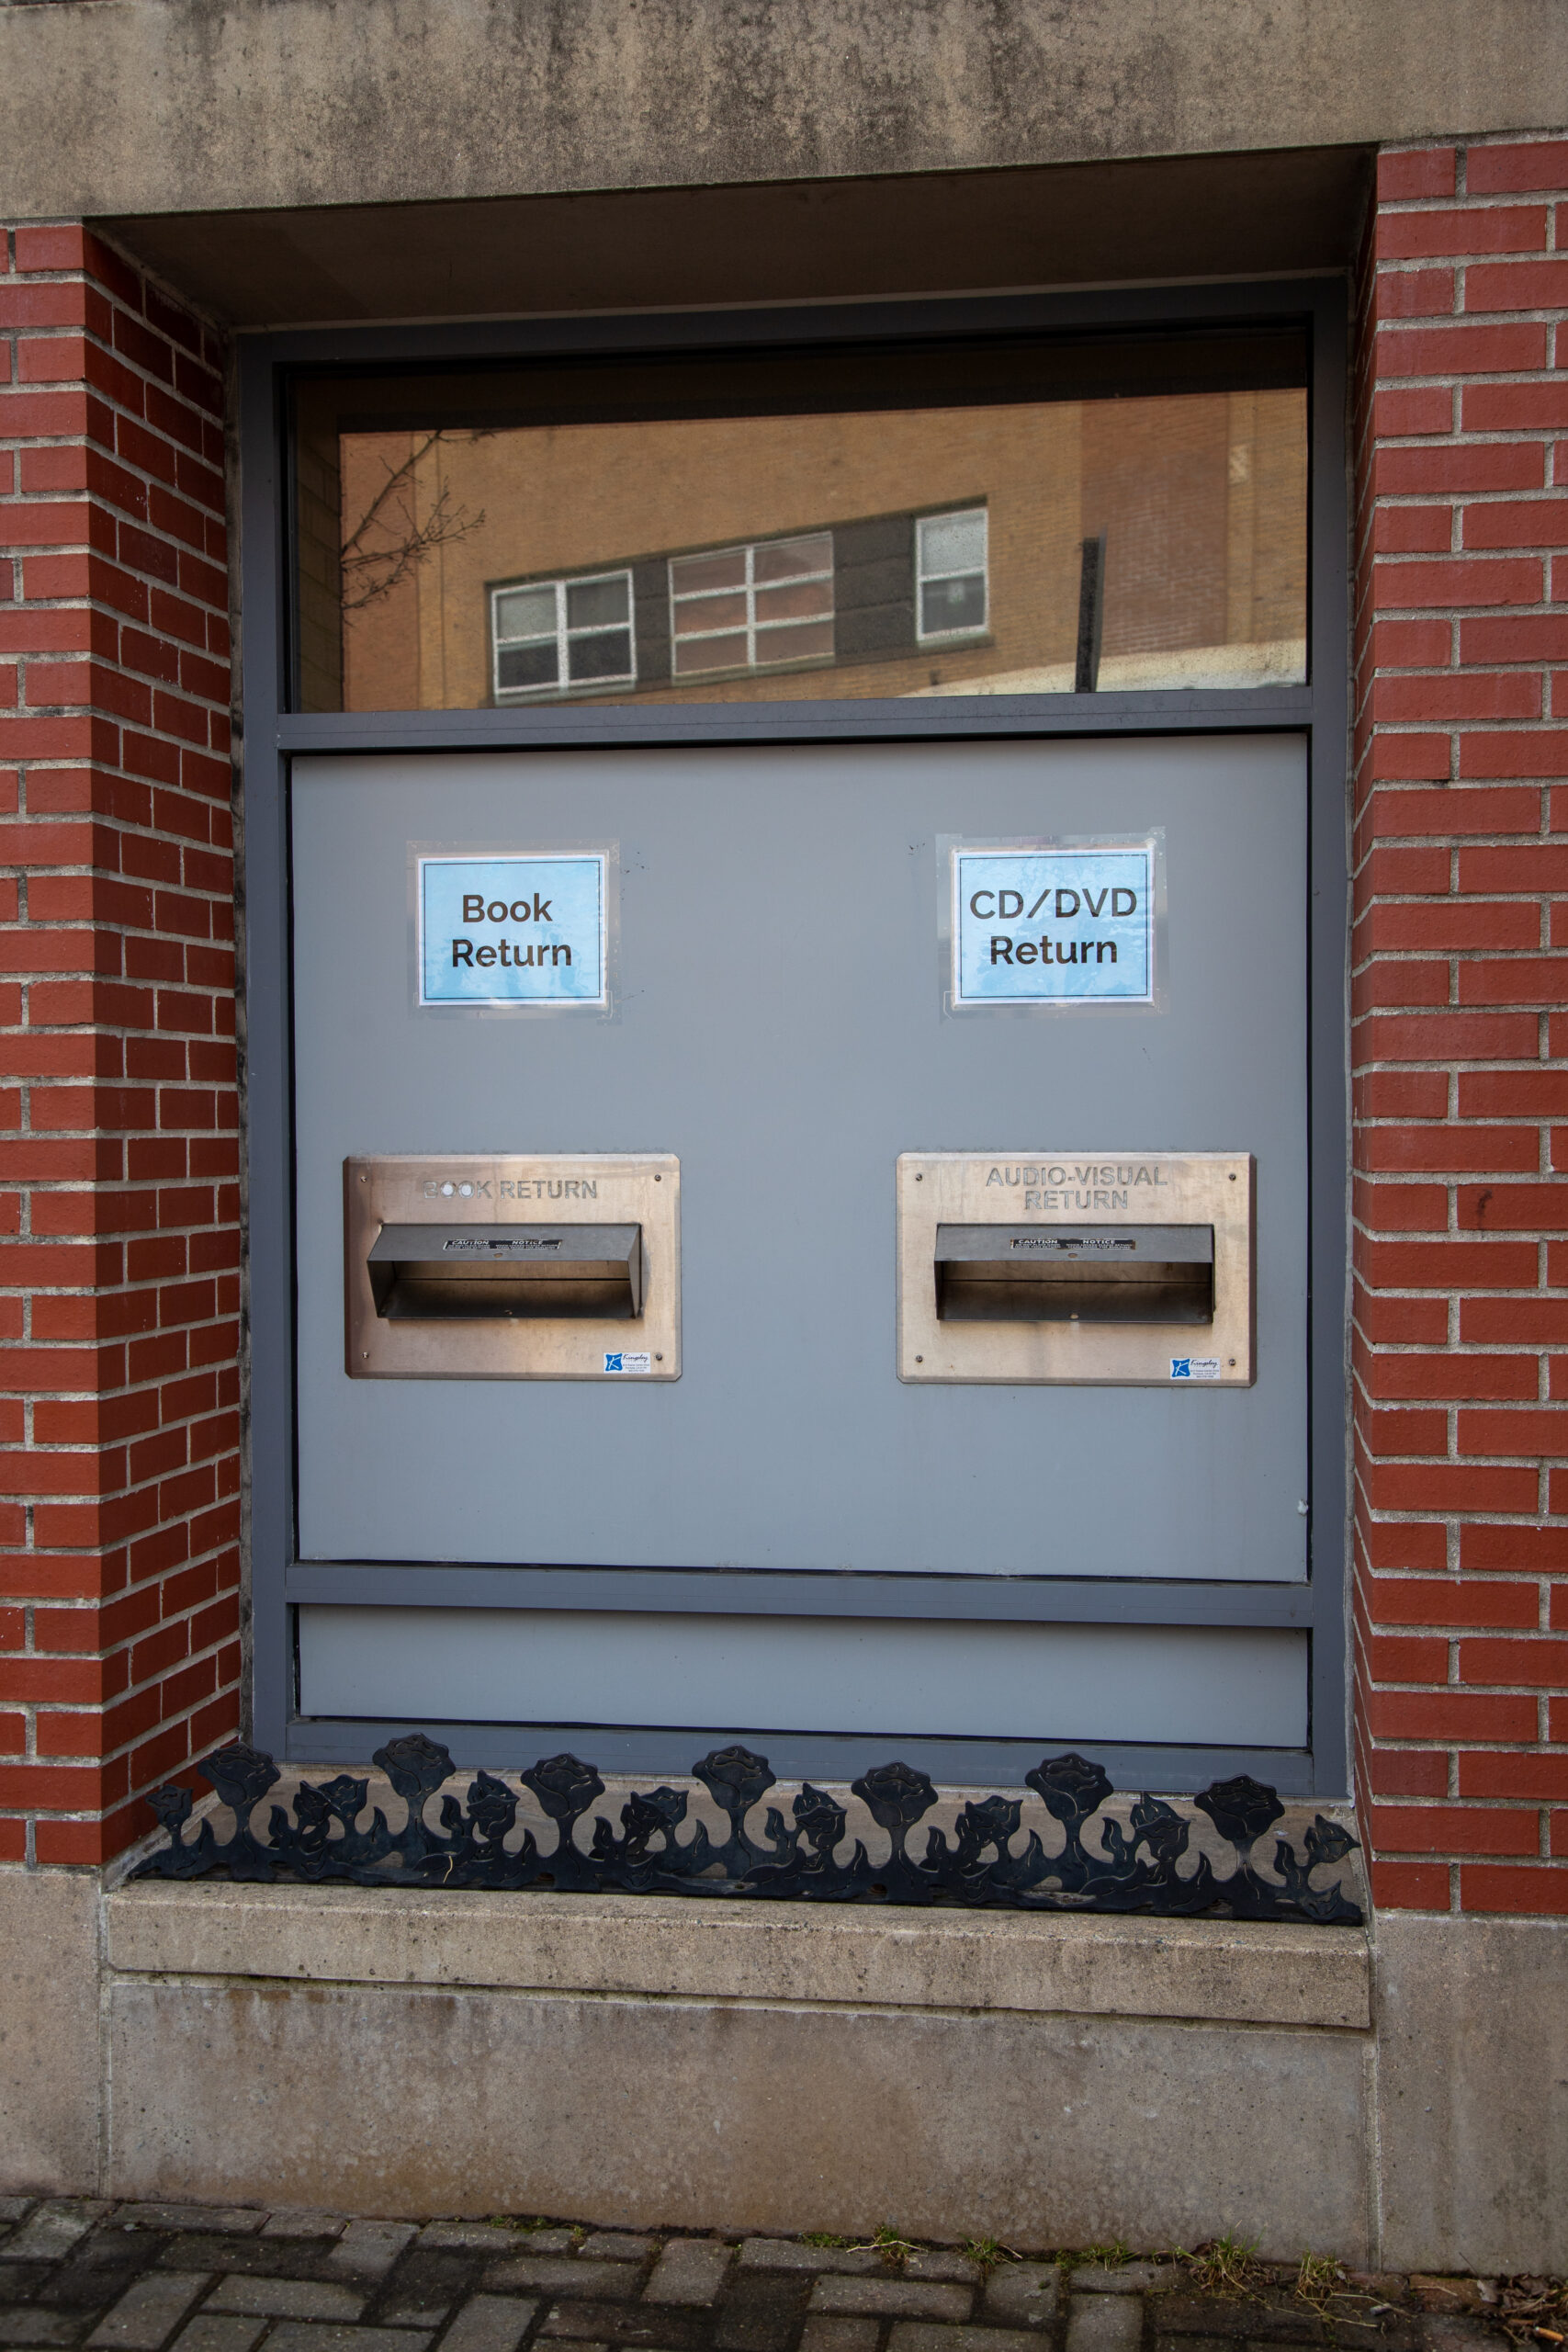 The Otis Library book drop is centered